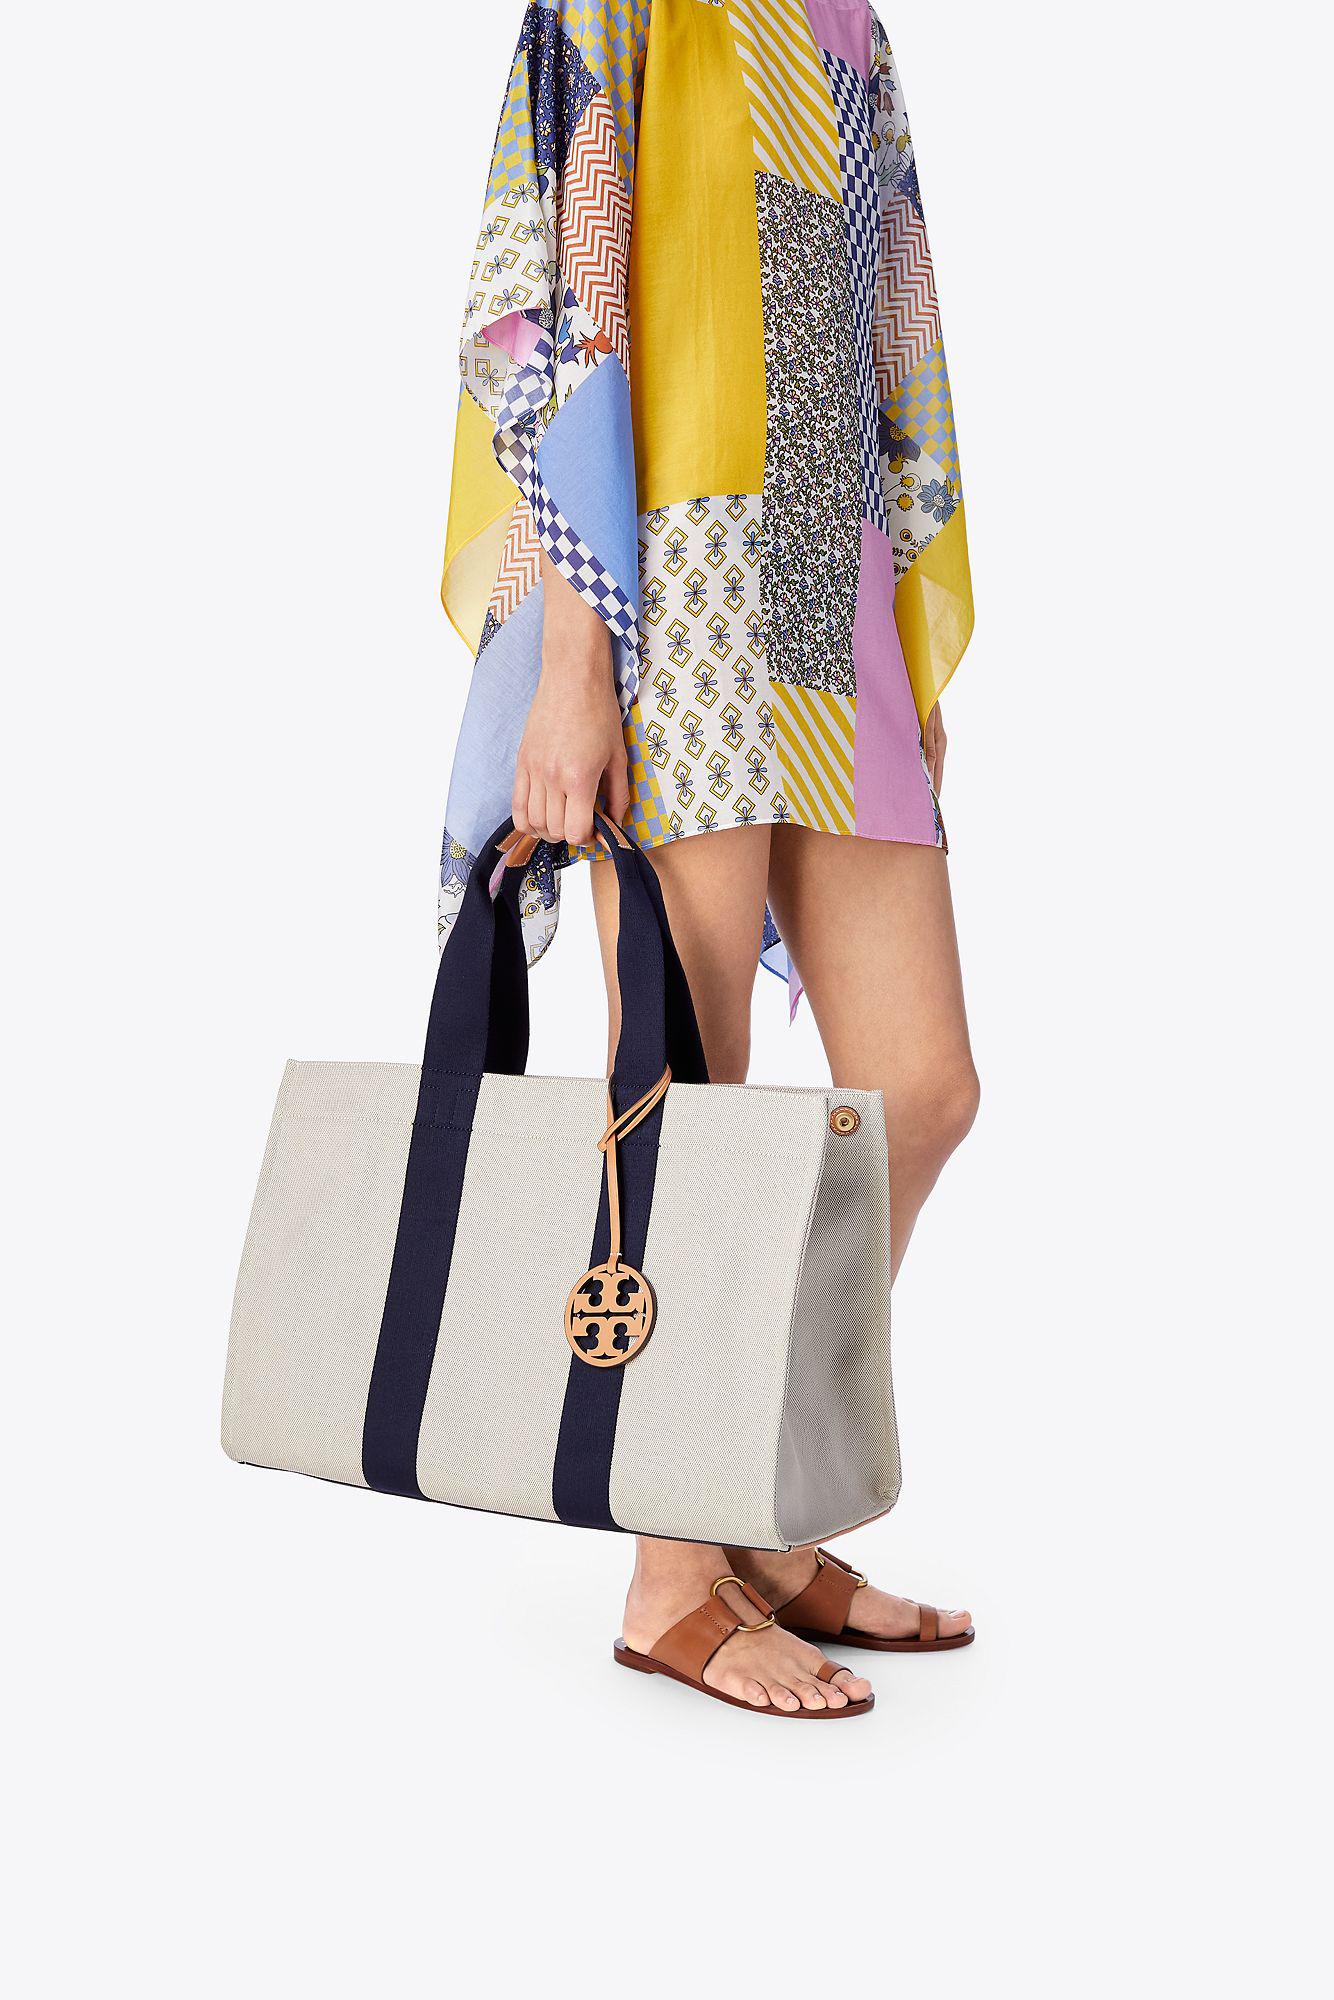 Tory Burch Miller Large Canvas Tote in 